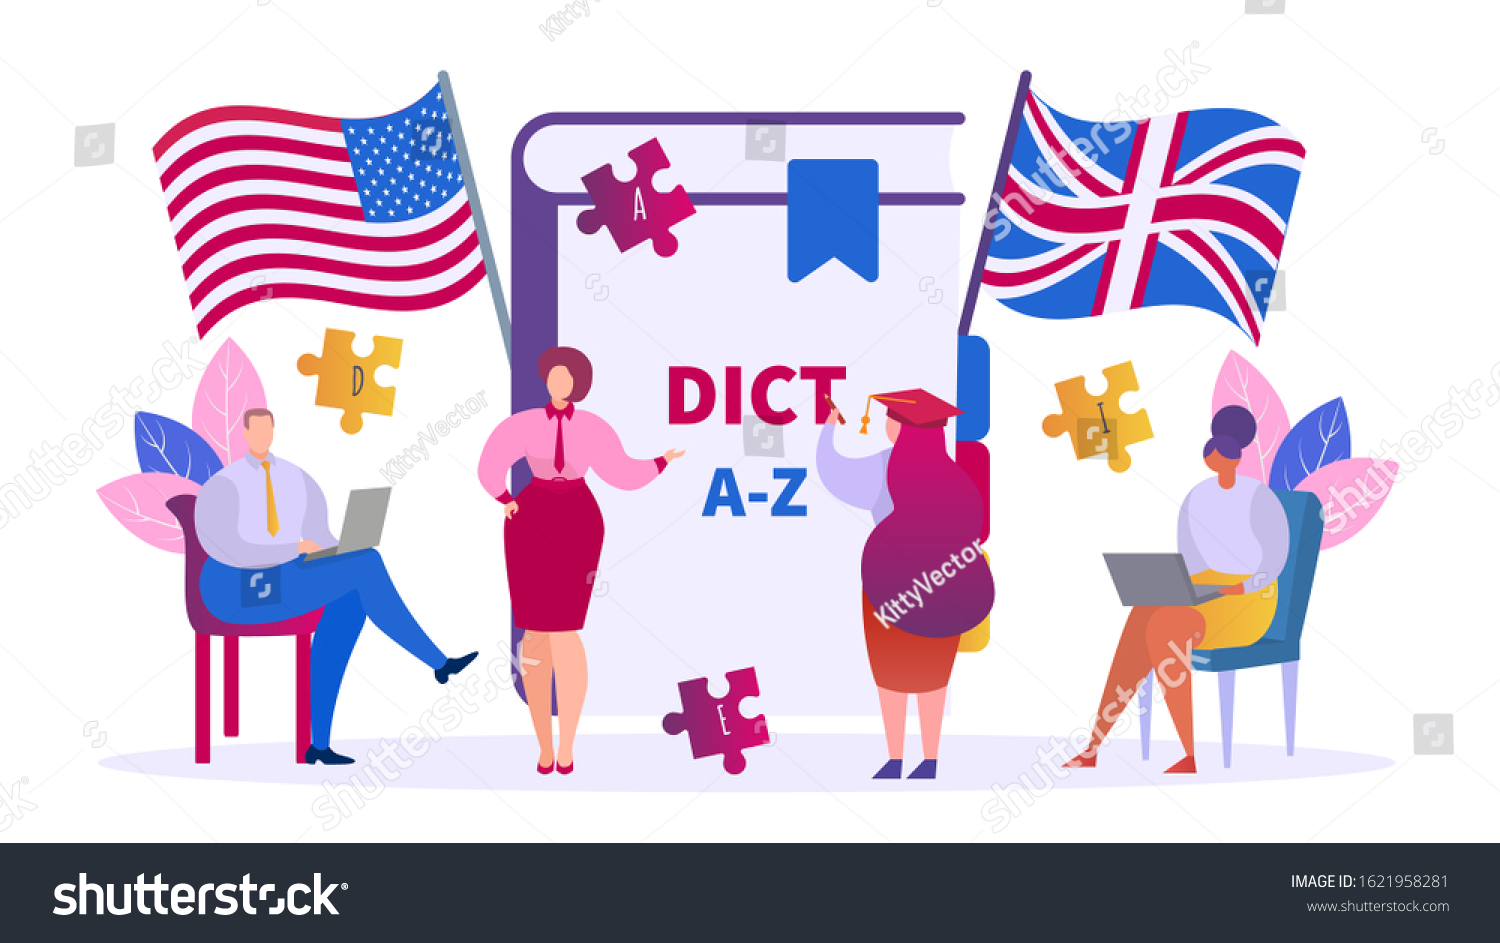 SVG of Learning English education concept, teacher and students vector isolated illustration. Class lesson in group of people studying English language. Dictionary, american and british flags, laptops. svg